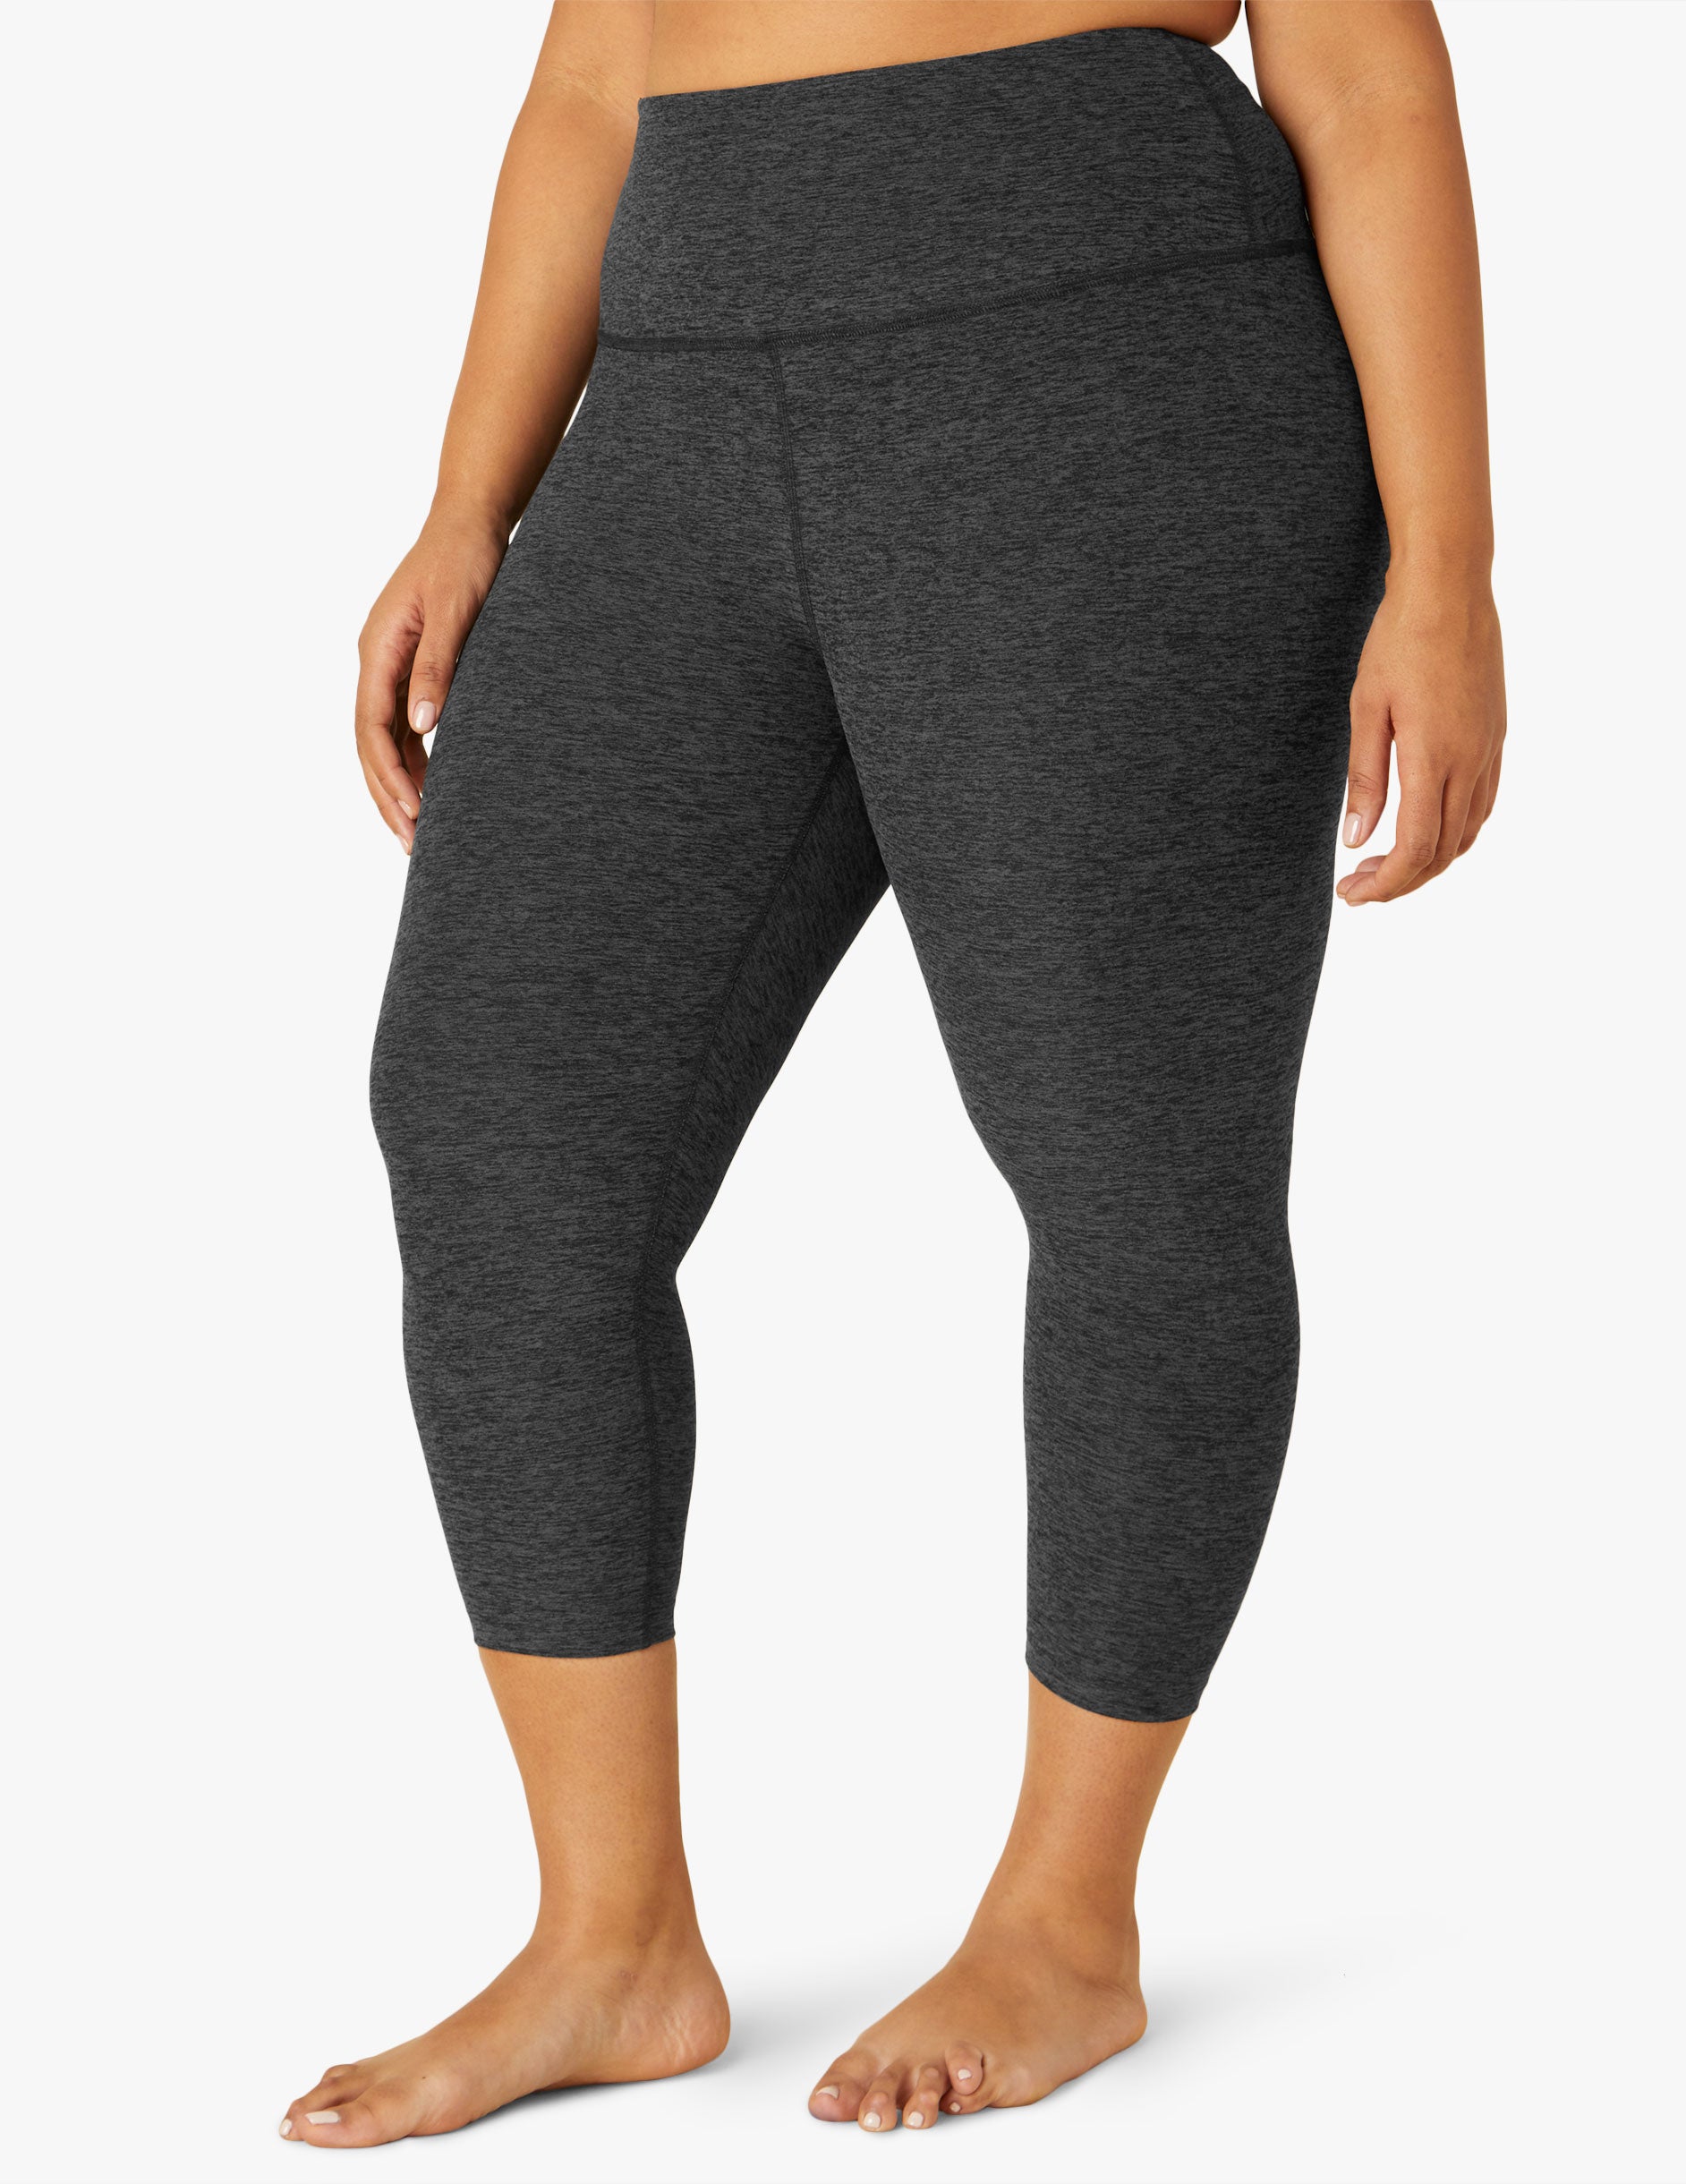 Beyond Yoga Women's Wide Band Stacking Capri Legging in Black Size SMALL